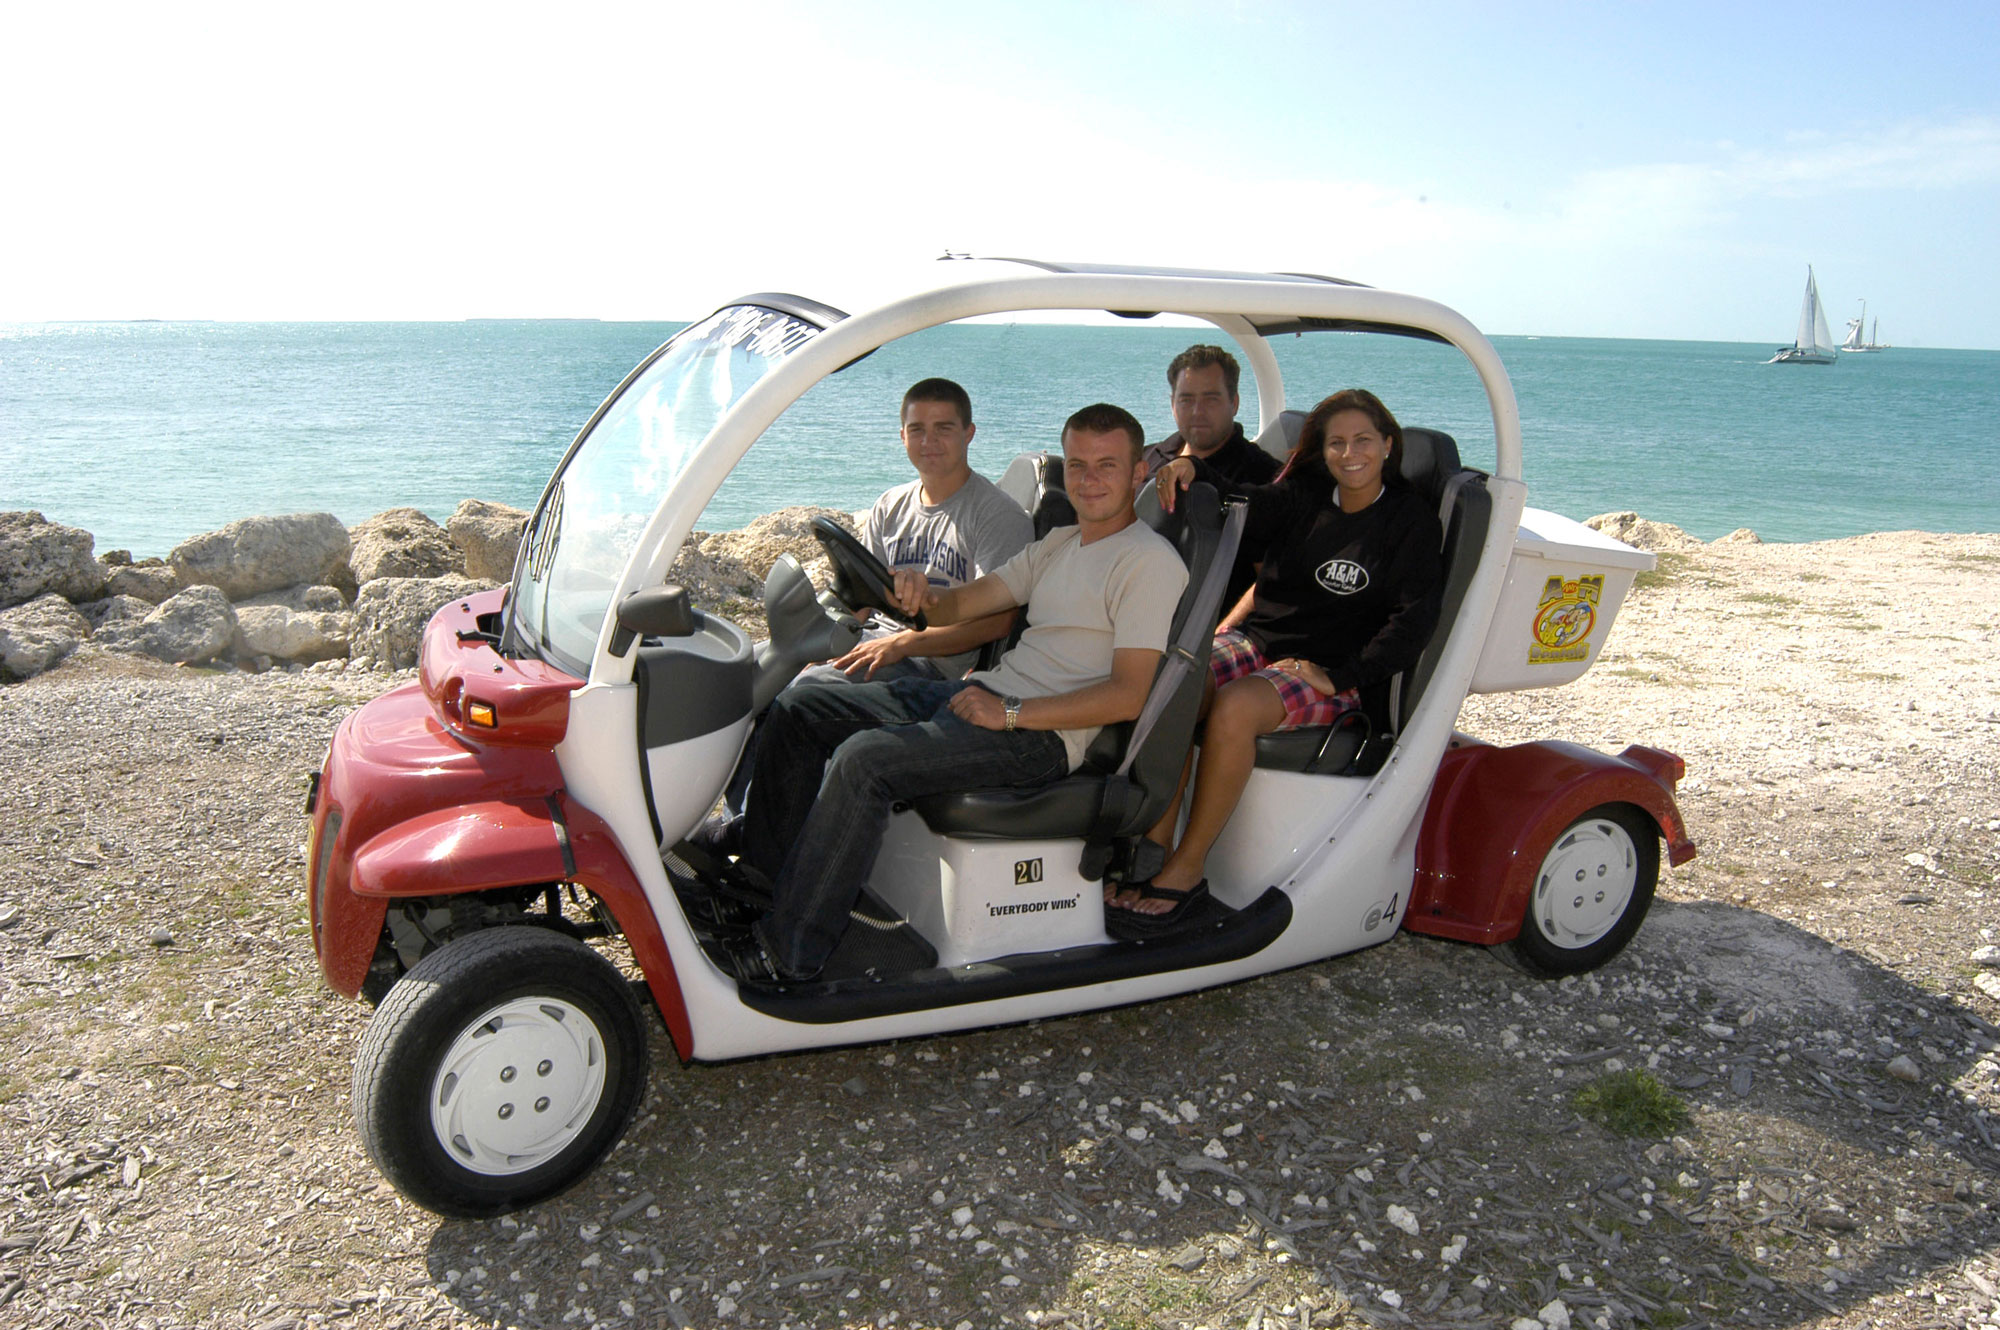 Four tourists in a red and white electric car rental at Fort Zachary National Park by the Ocean in Key West